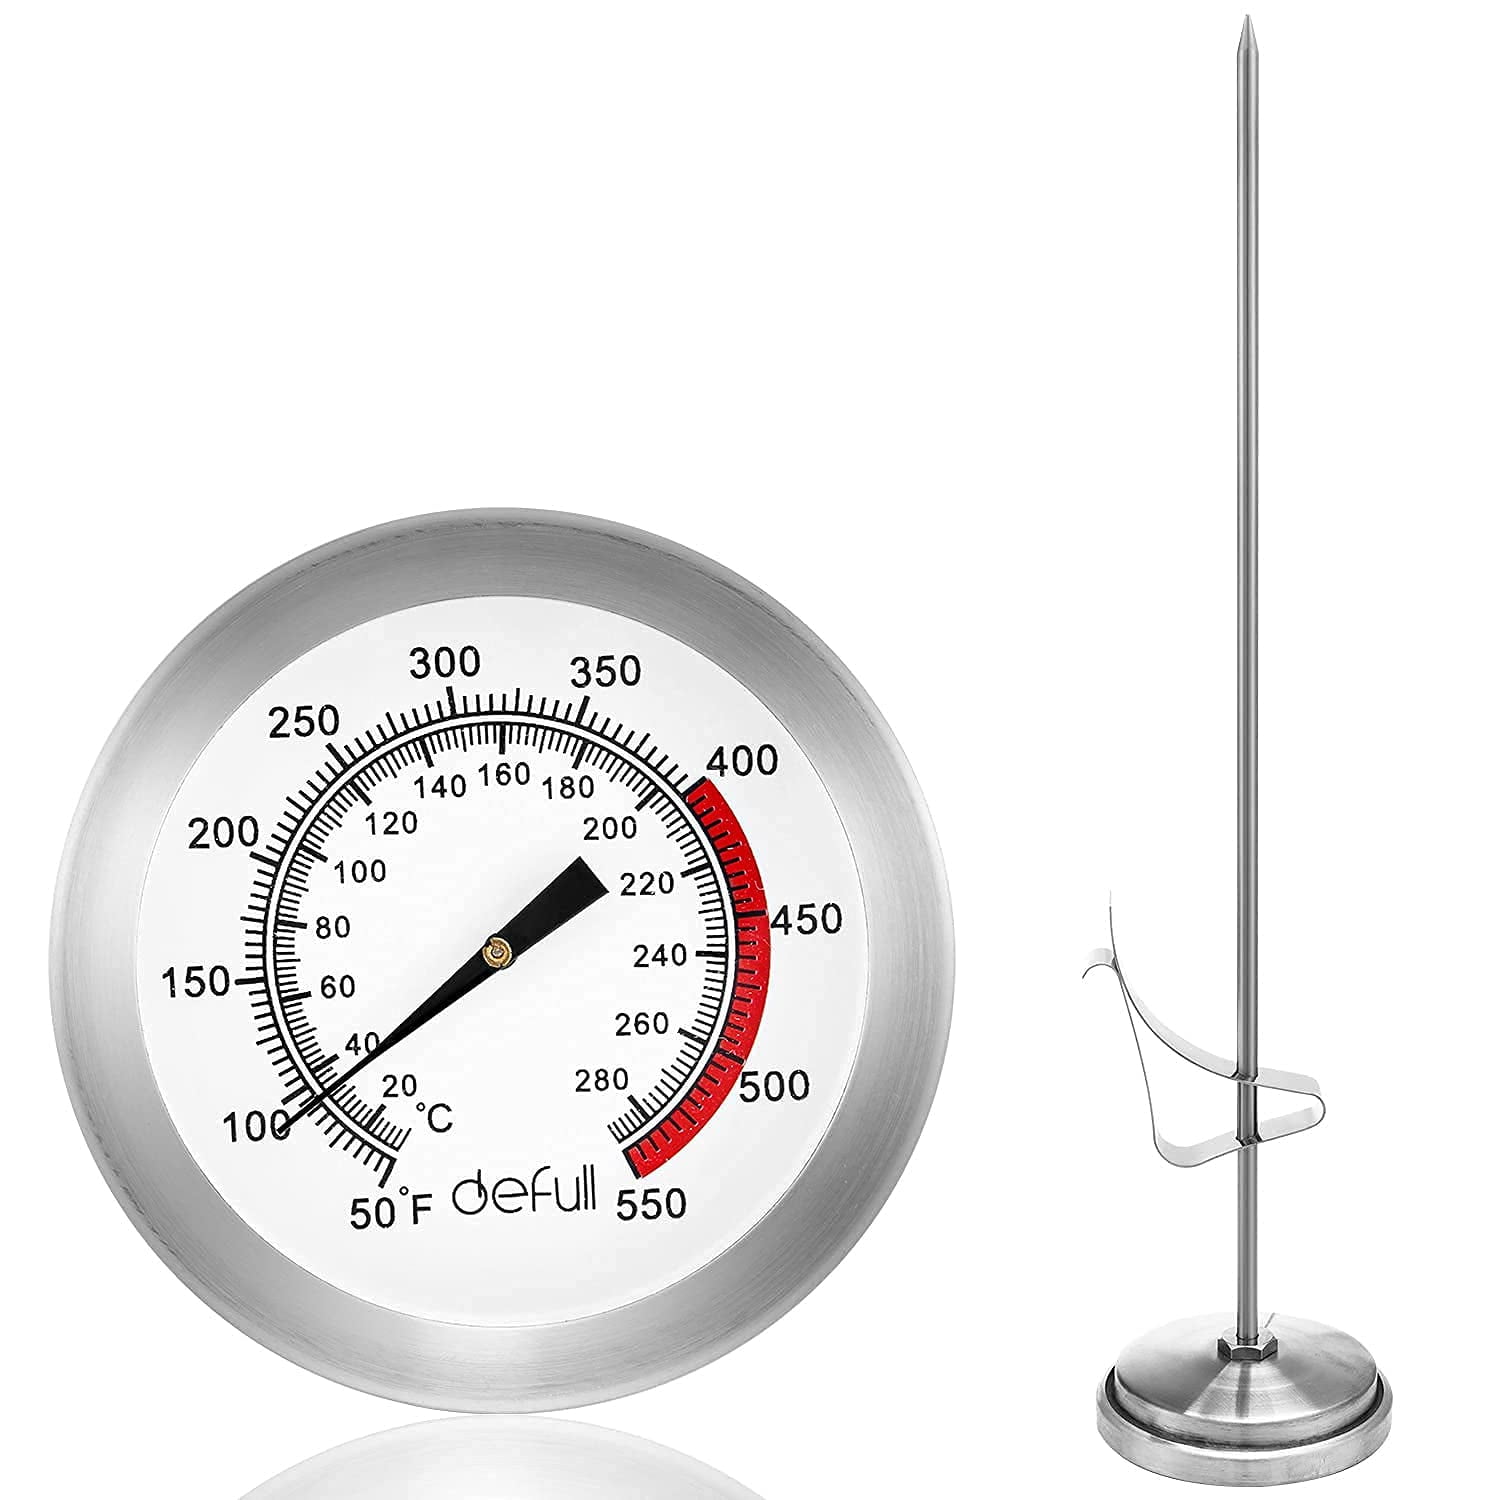 Home Made Sugar Thermometer with Pot Clip & Hanging Ring Handle